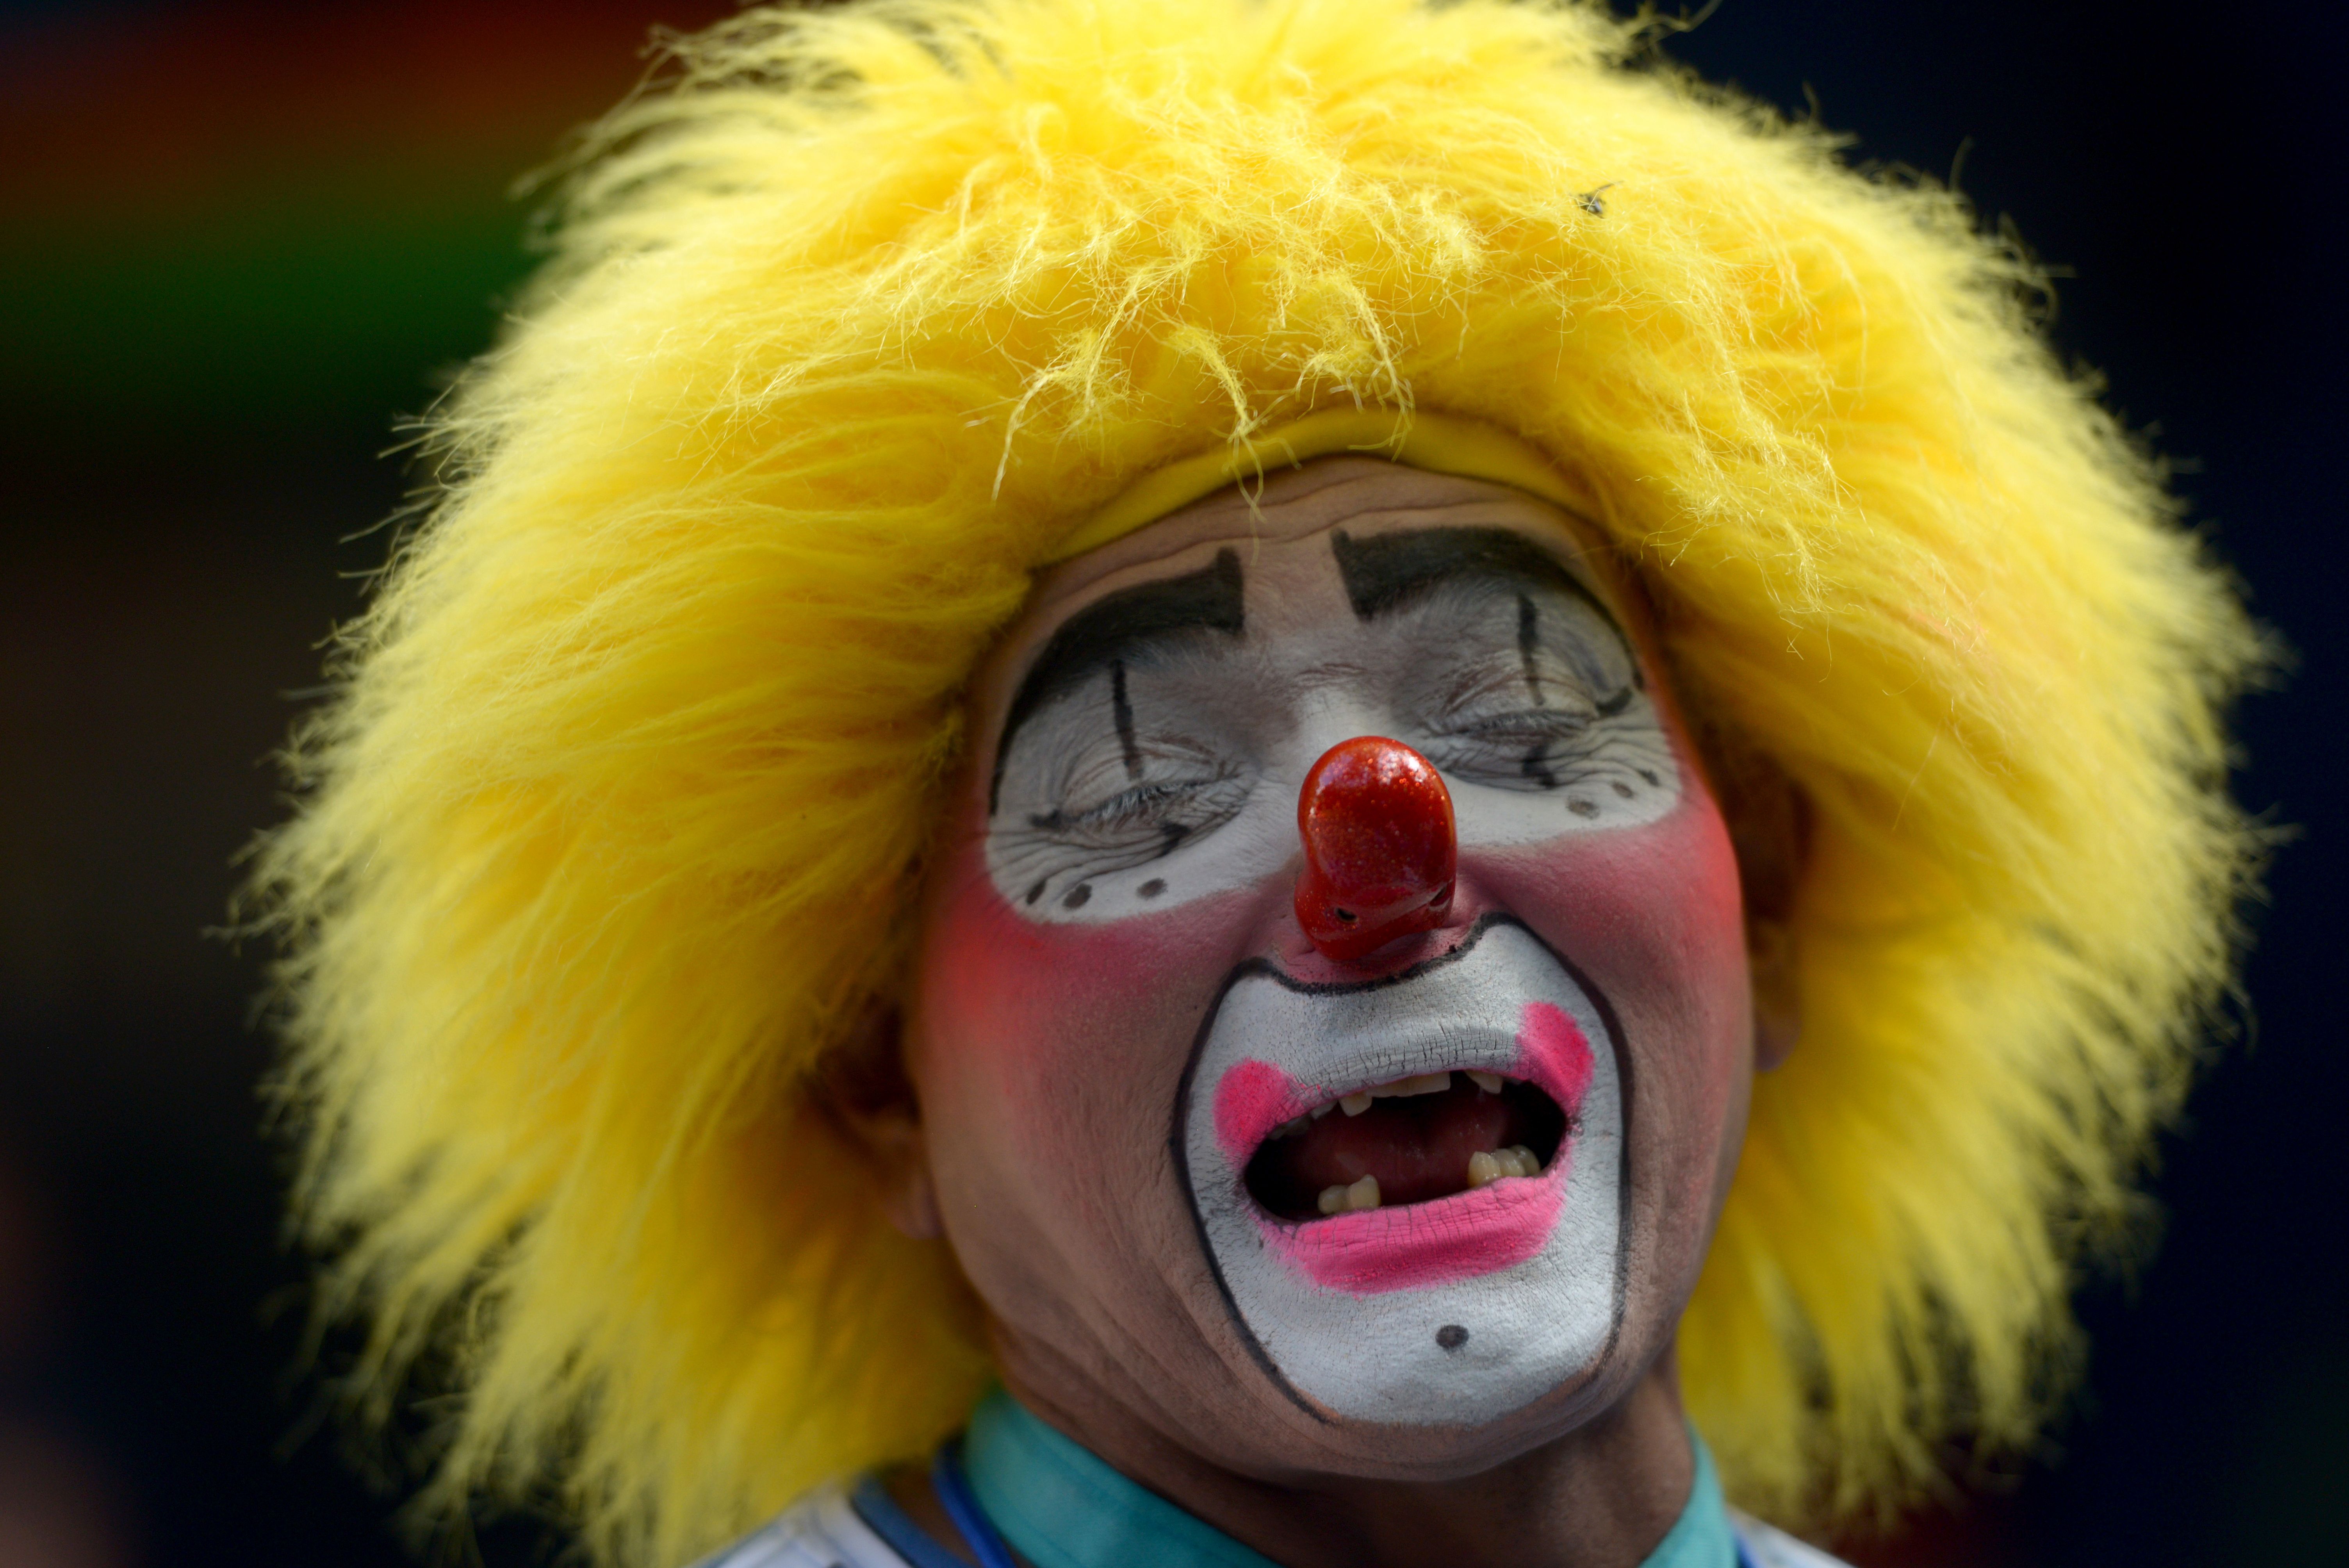 Clown Sightings List Which States Have Creepy Clowns?